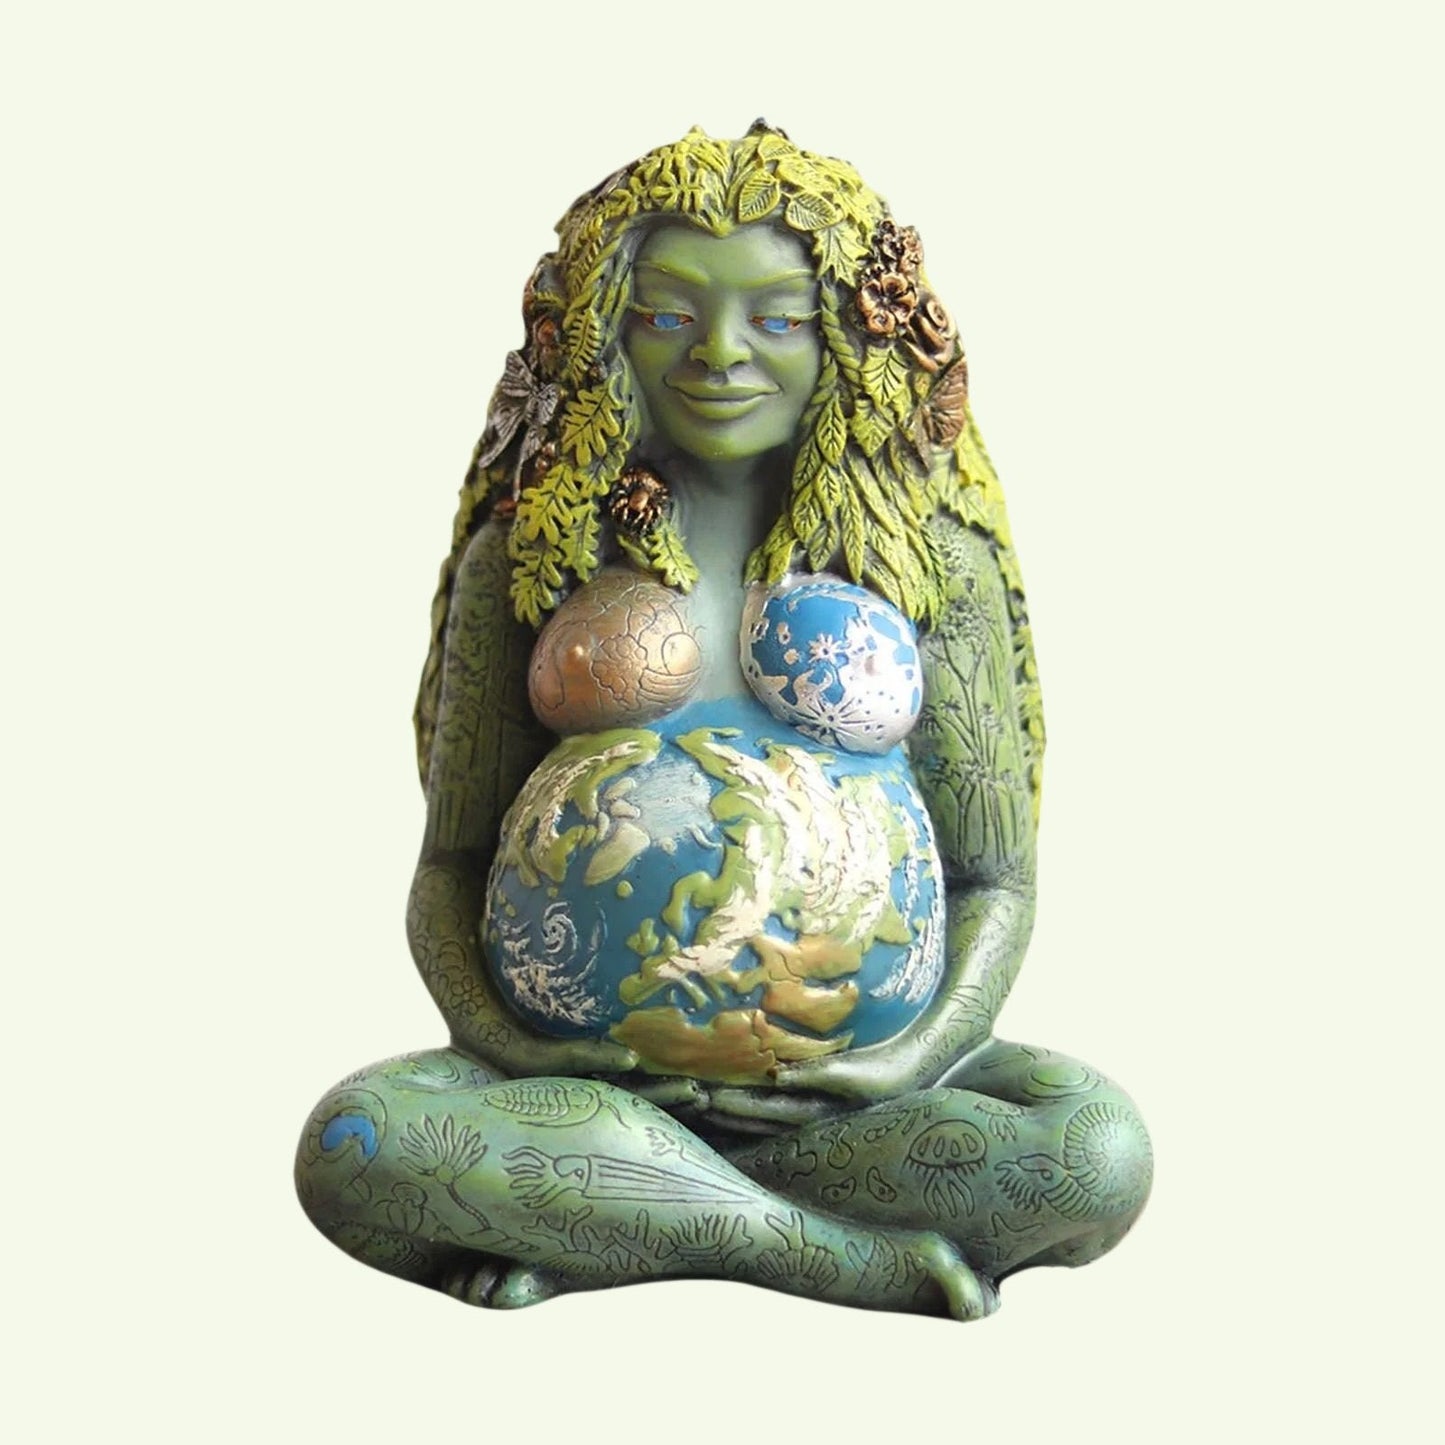 Mother Earth Millennial Gaia Resin Statue Ornaments - Goddess Statue sculptures Figurine interior Decorative Home living room decoration